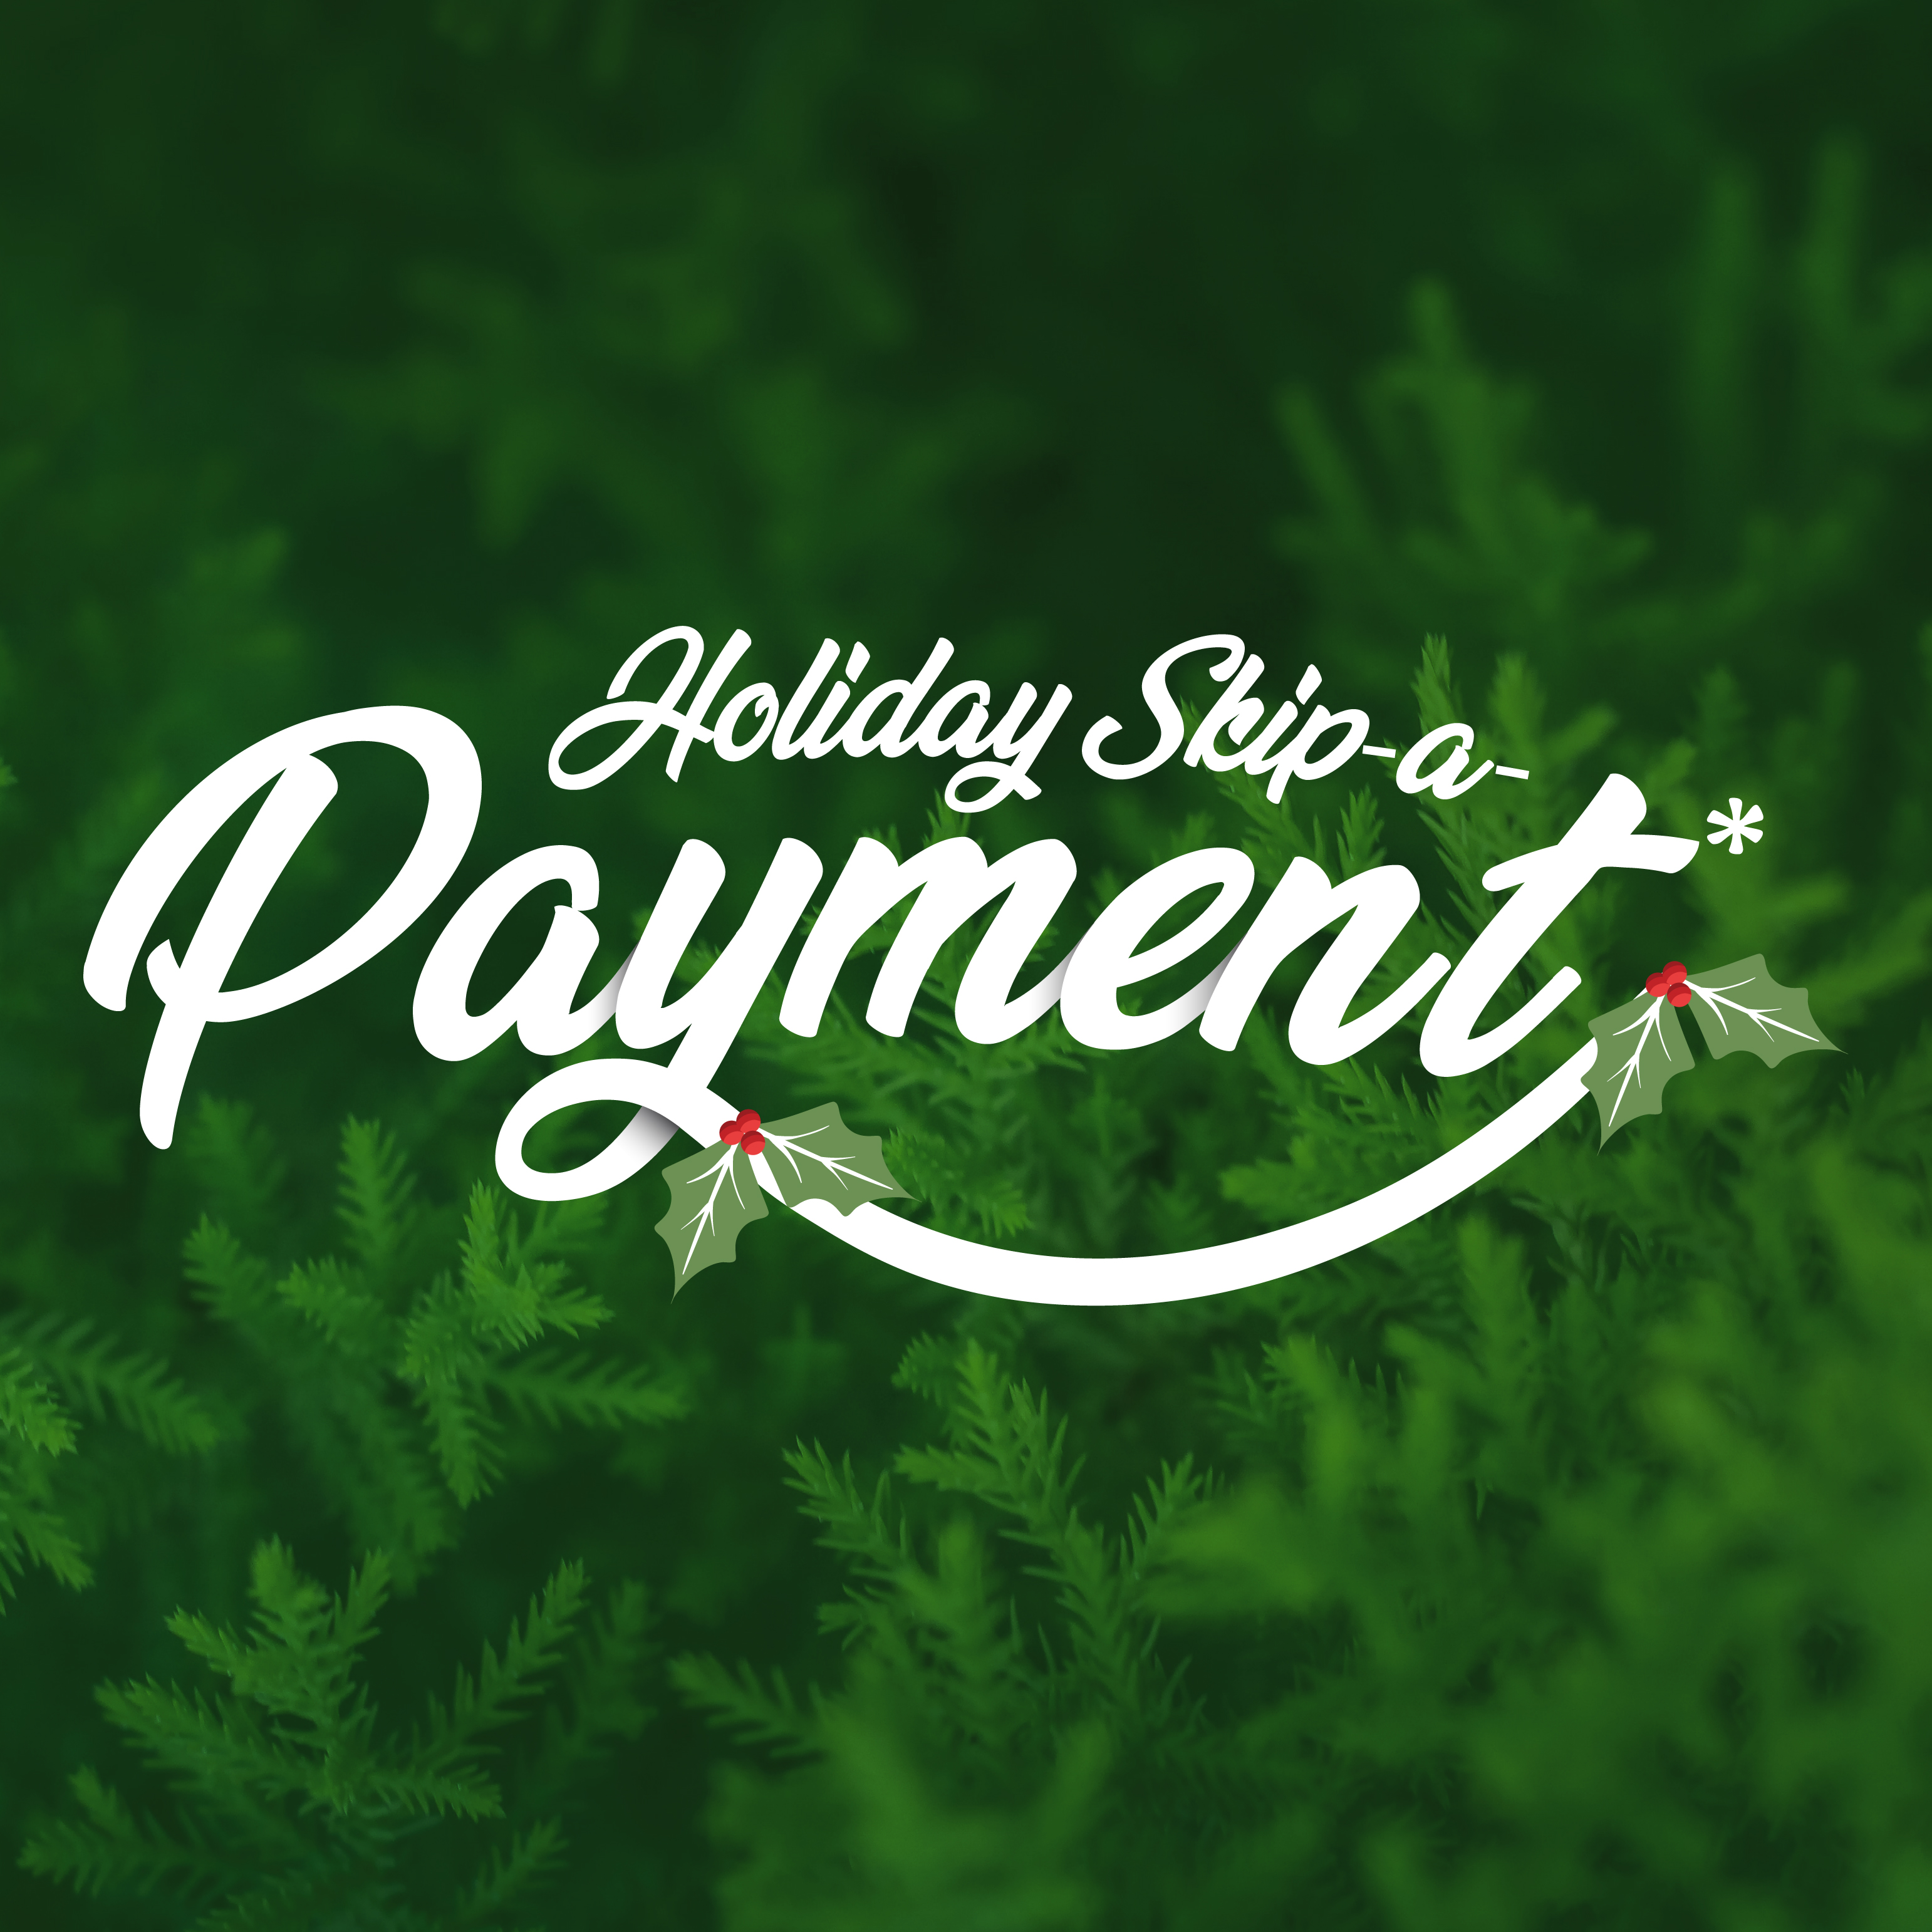 Skip a payment image